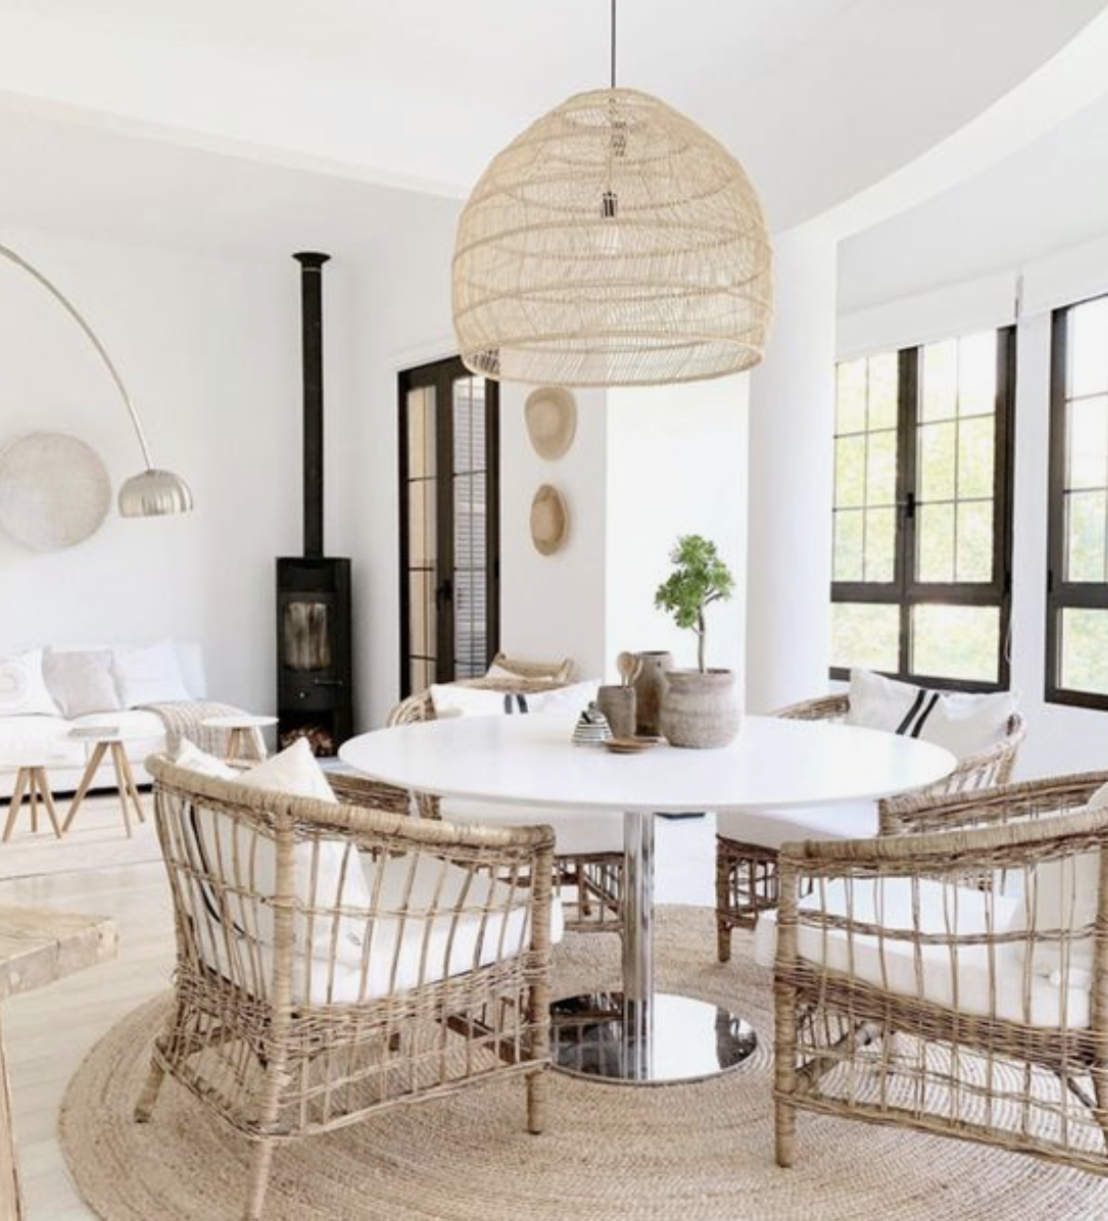 A light and airy breakfast nook with an oversized chandelier and wicker chairs provide a casual feel to this breakfast nook.